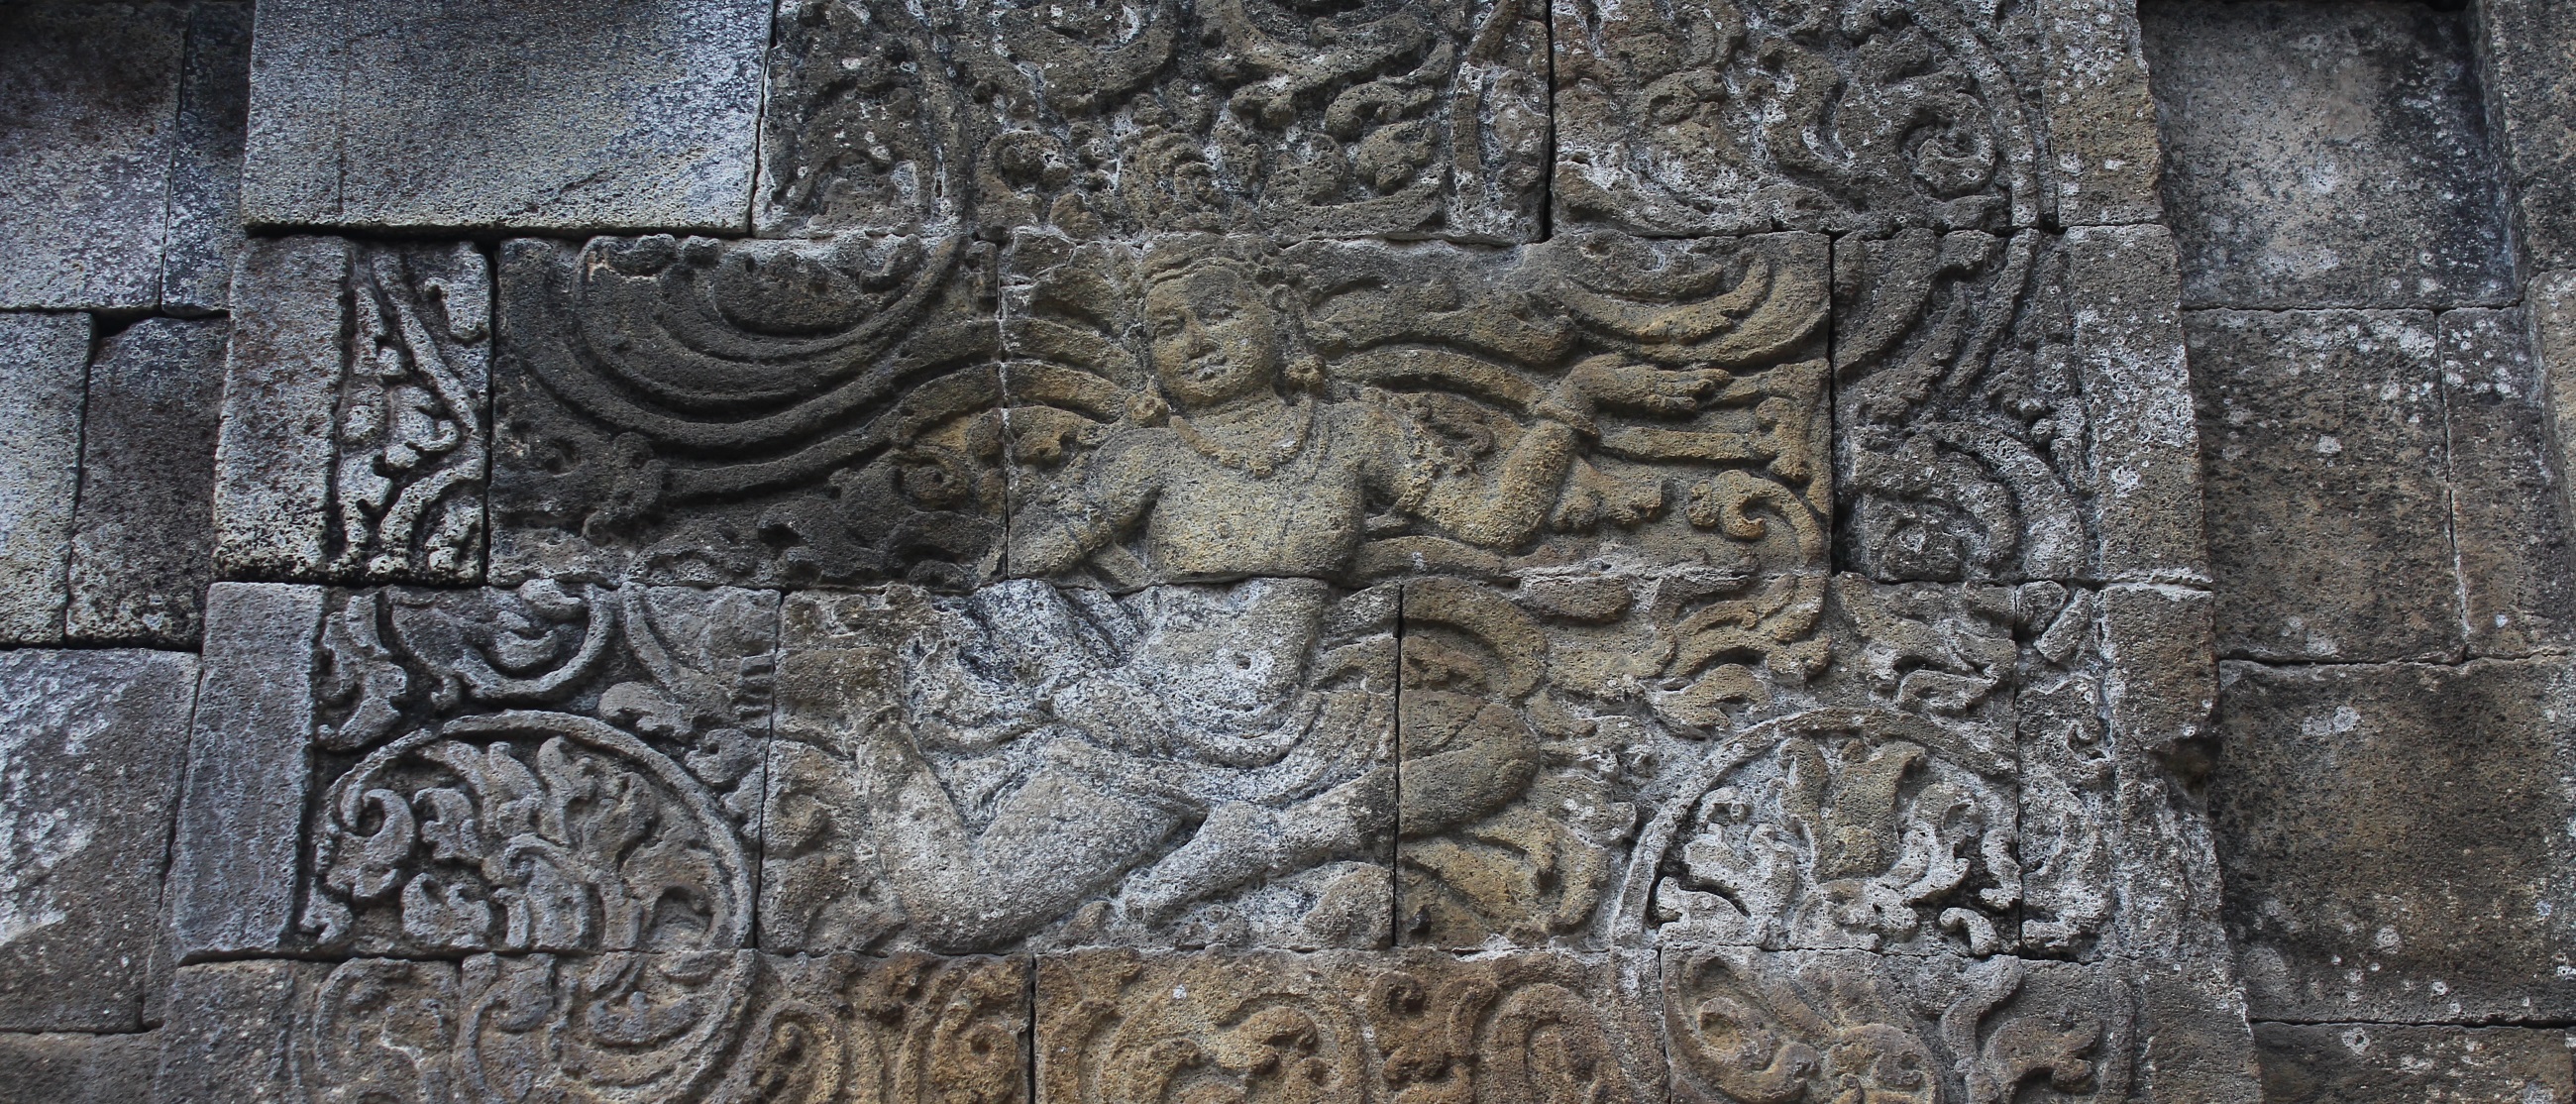 The relief carvings on Candi Mendut.